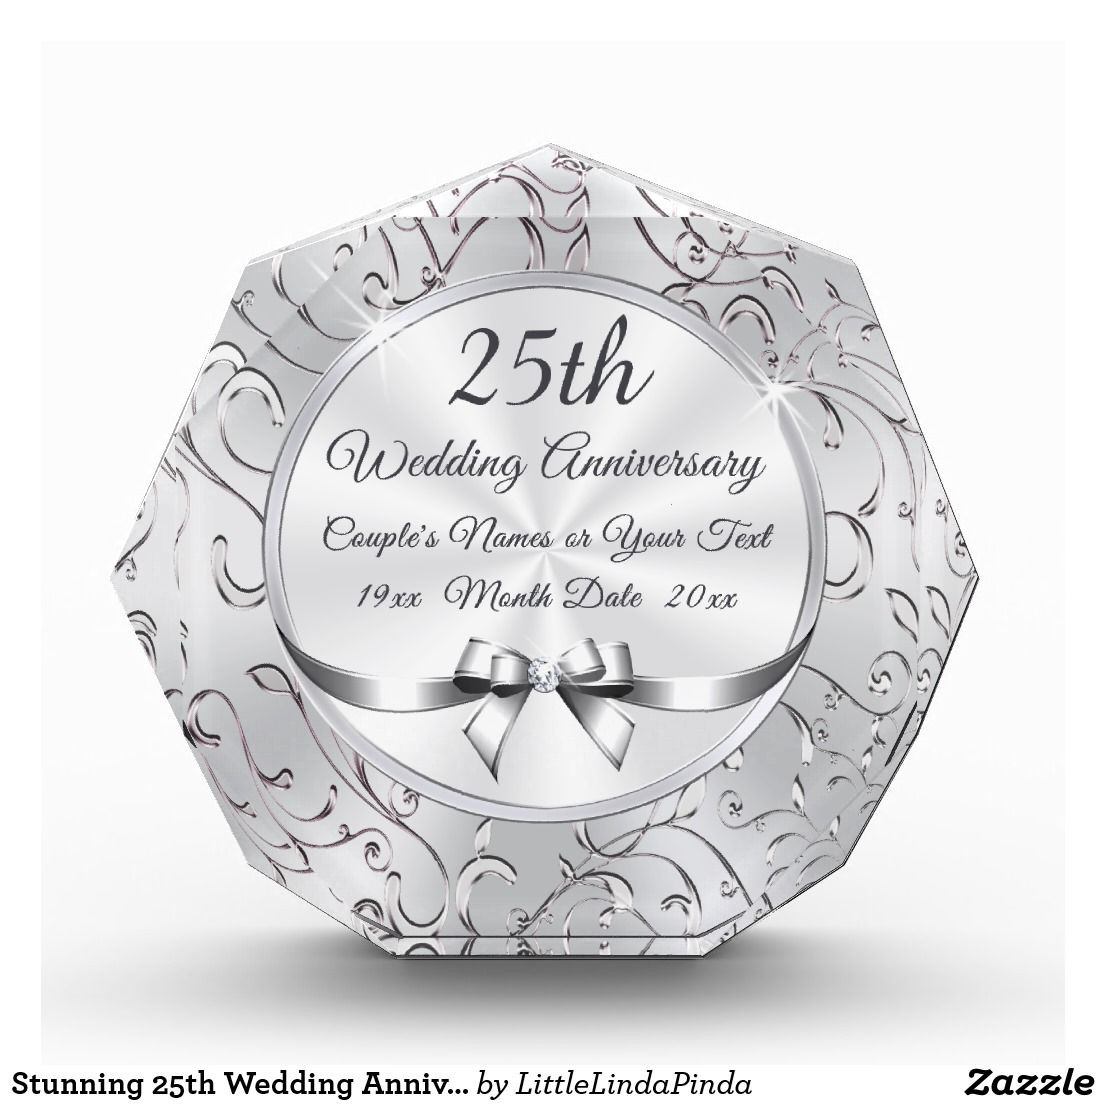 Wedding Anniversary Gift Ideas For Friends
 Stunning 25th Wedding Anniversary Gift Ideas